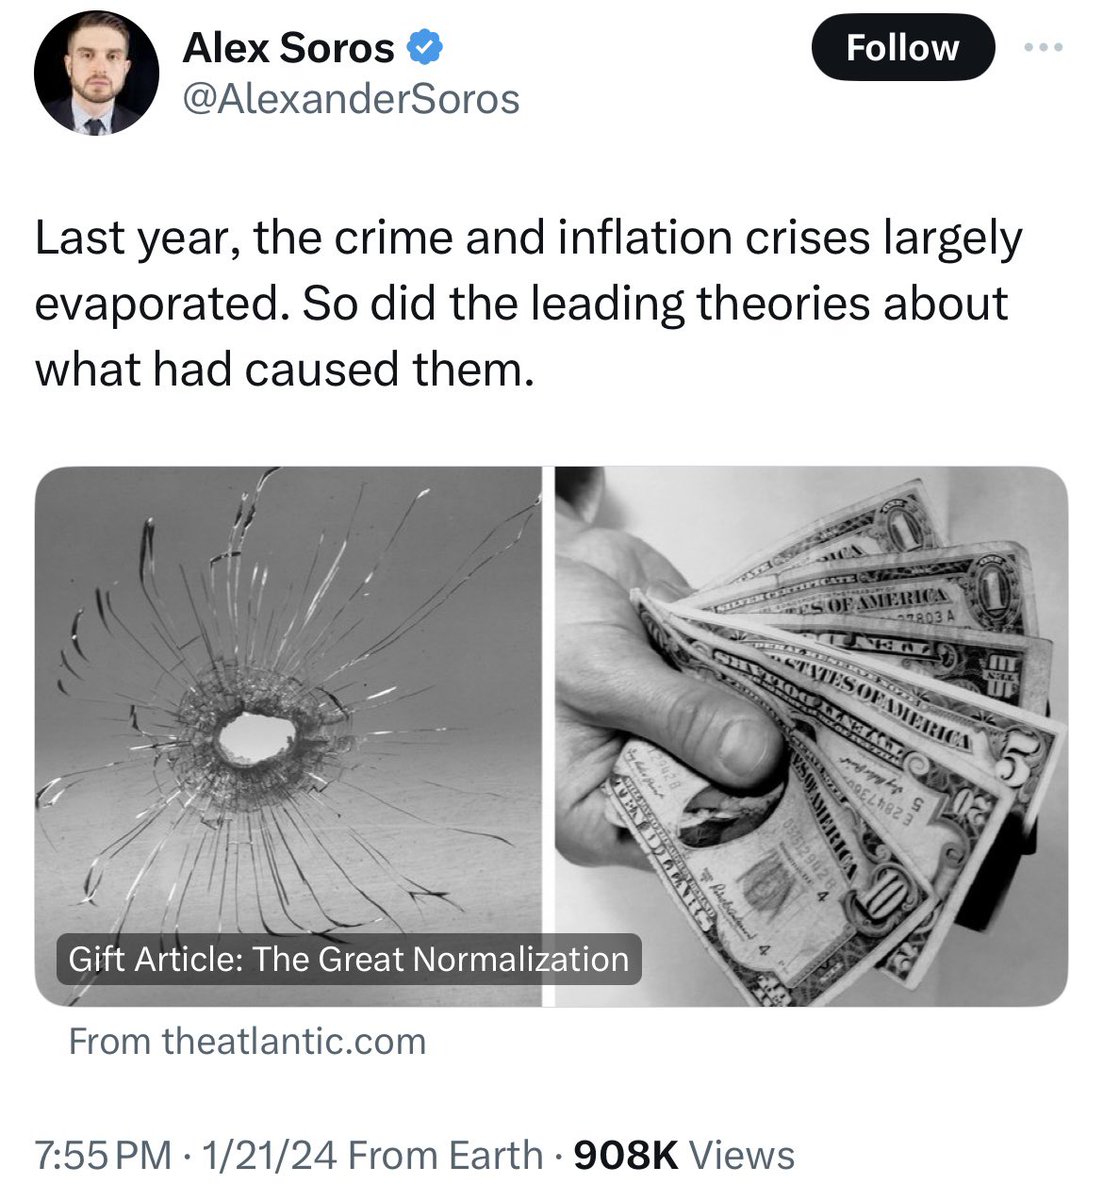 Why is Alex Soros positing a bullet hole next to $47 dollars with an article full of lies? This looks like a threat to me.